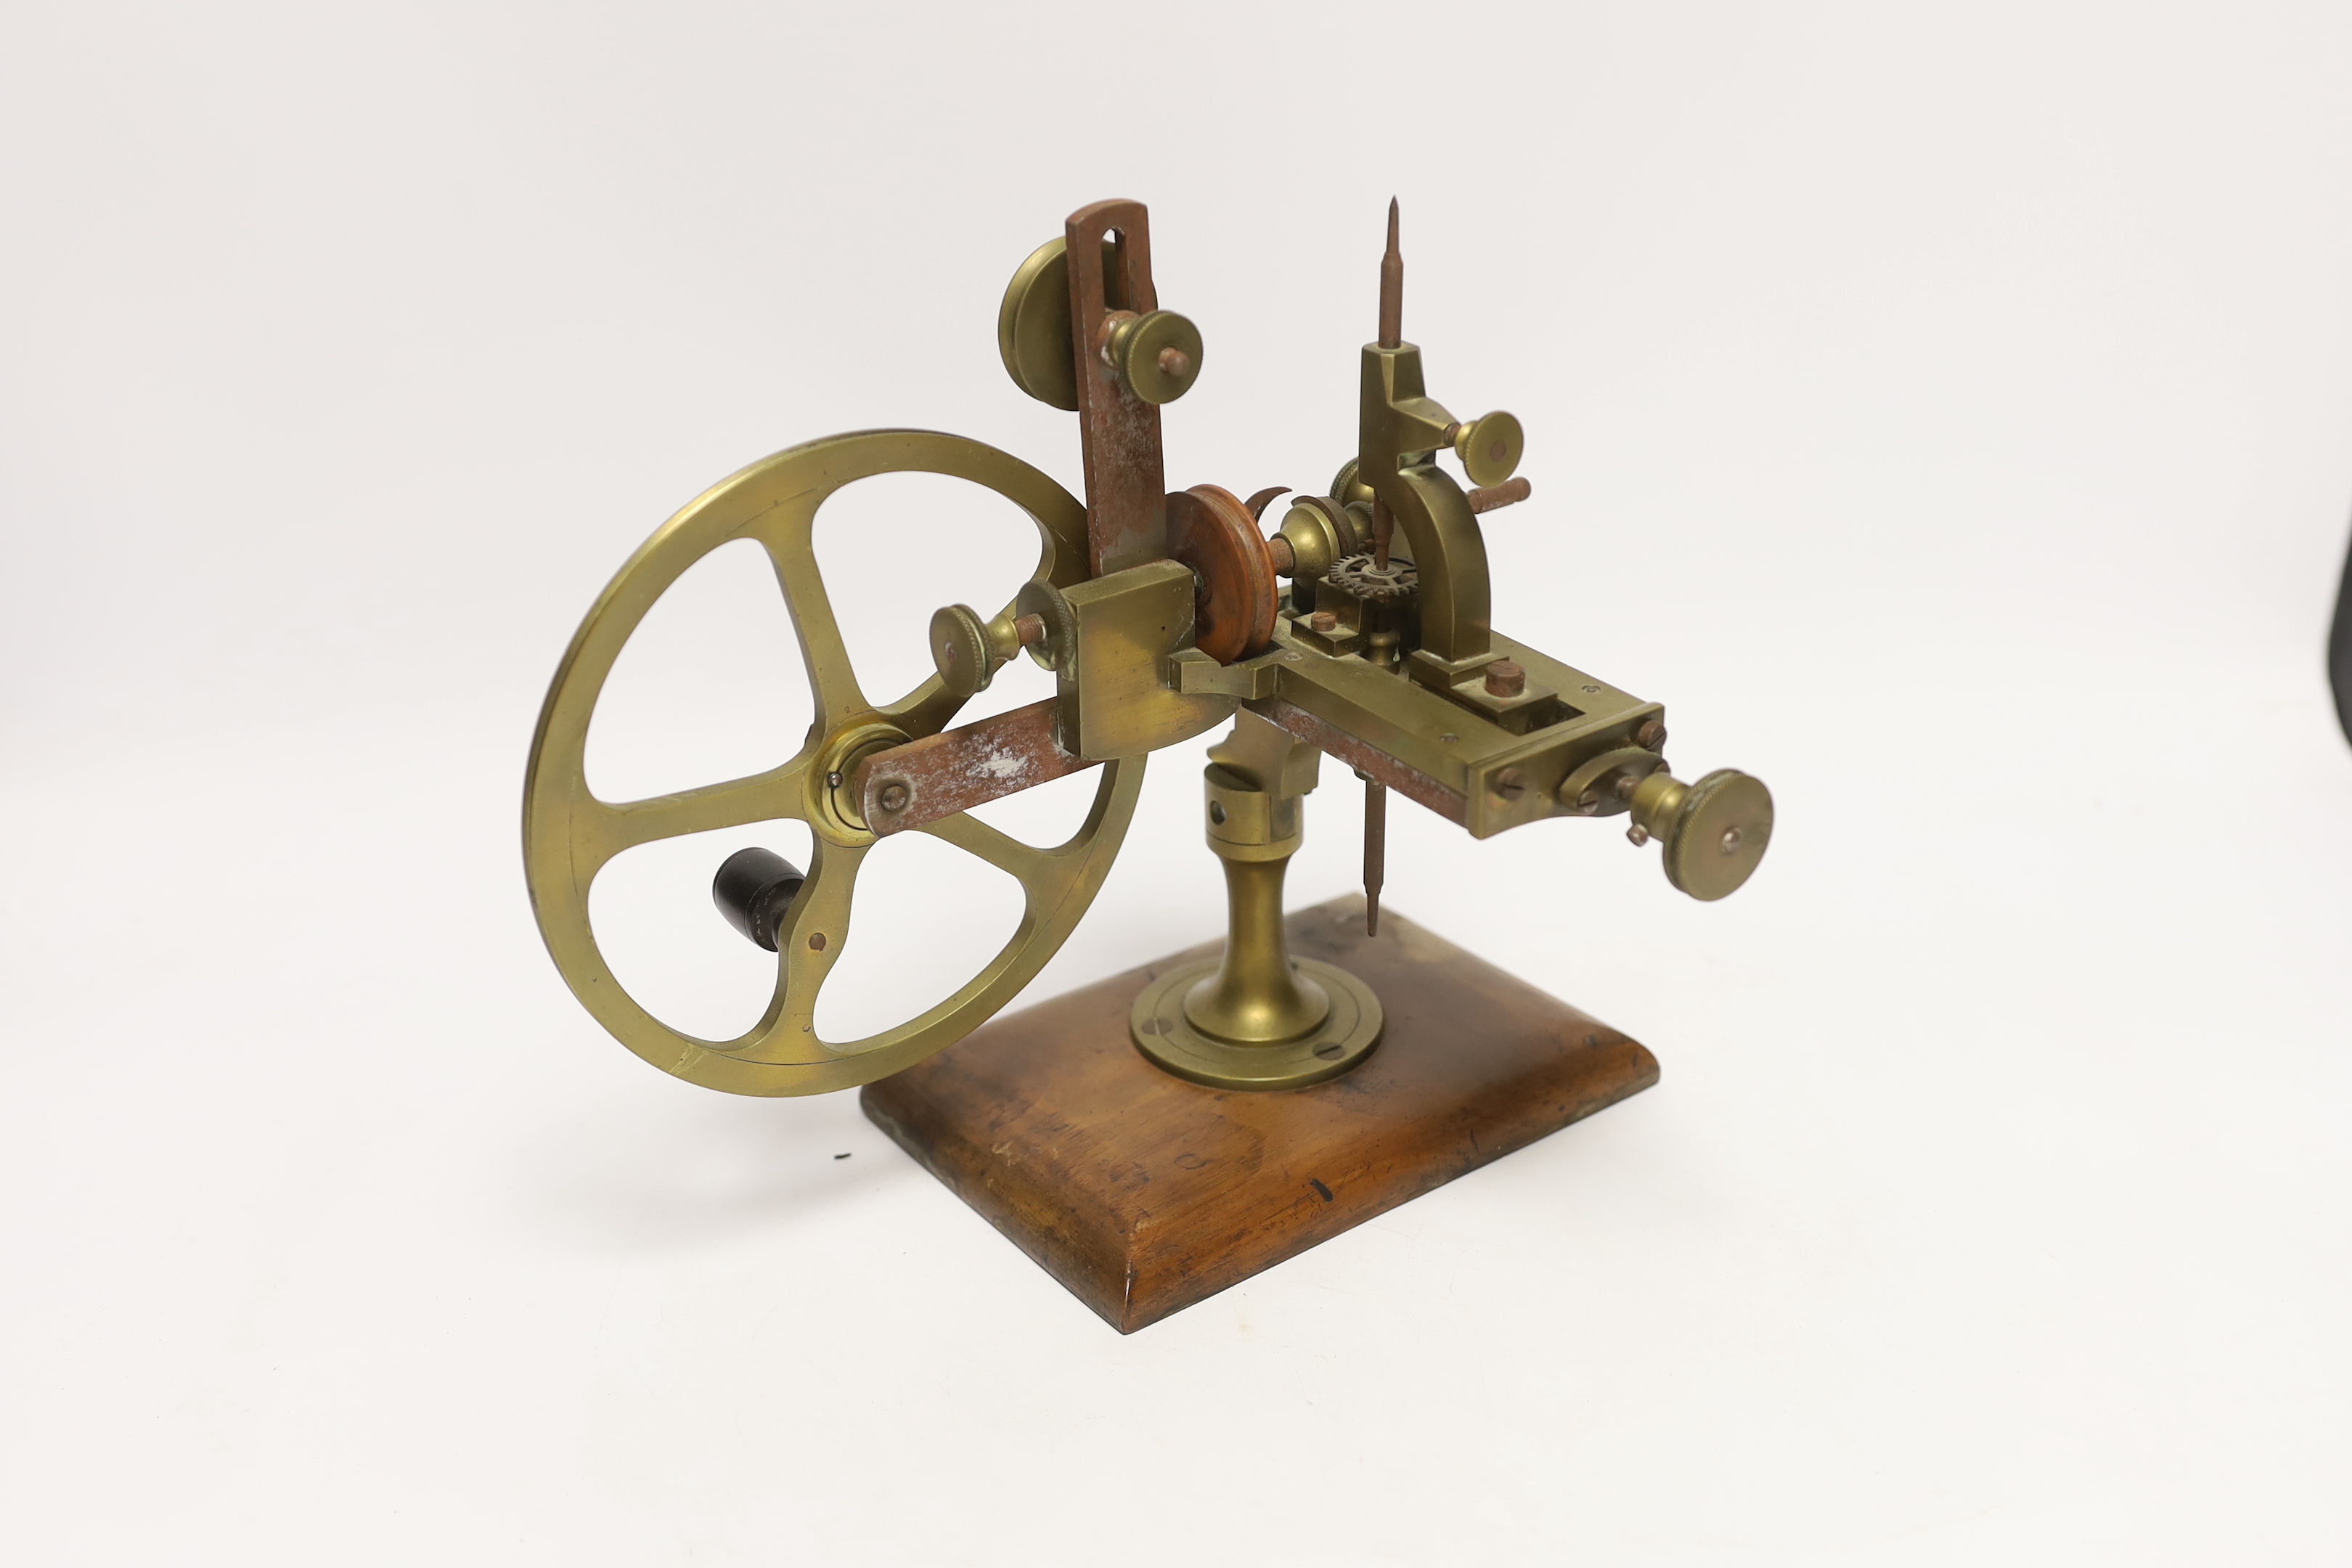 An early 20th century watchmaker's topping tool, for adapting the profile of teeth on watch wheels, 23cm high